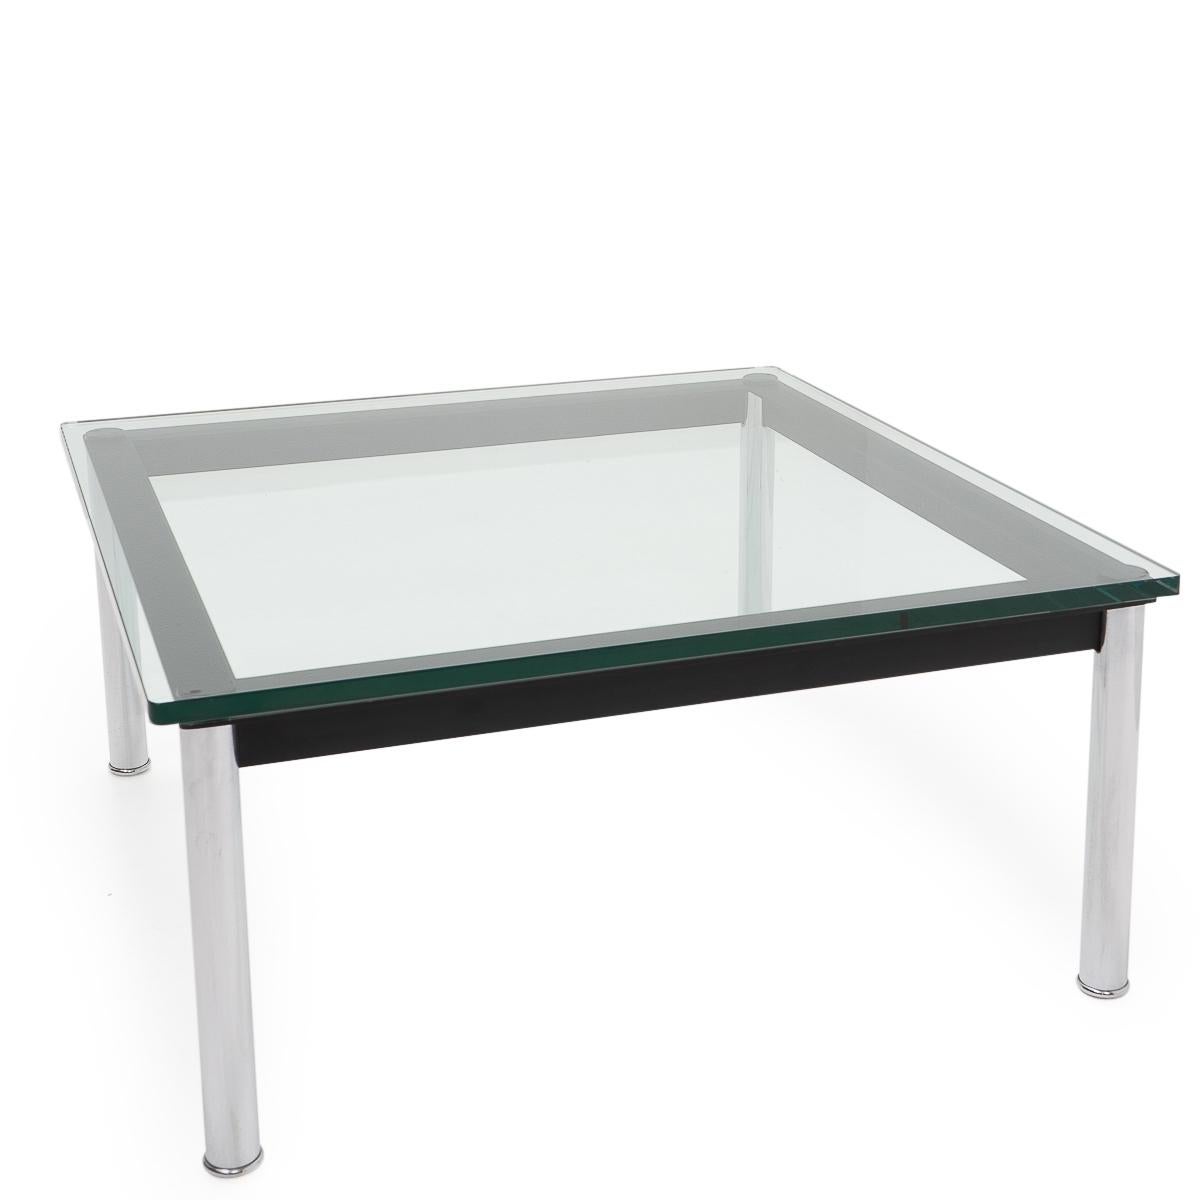 Italian Modernist Design LC10 Coffee Table by Le Corbusier for Cassina